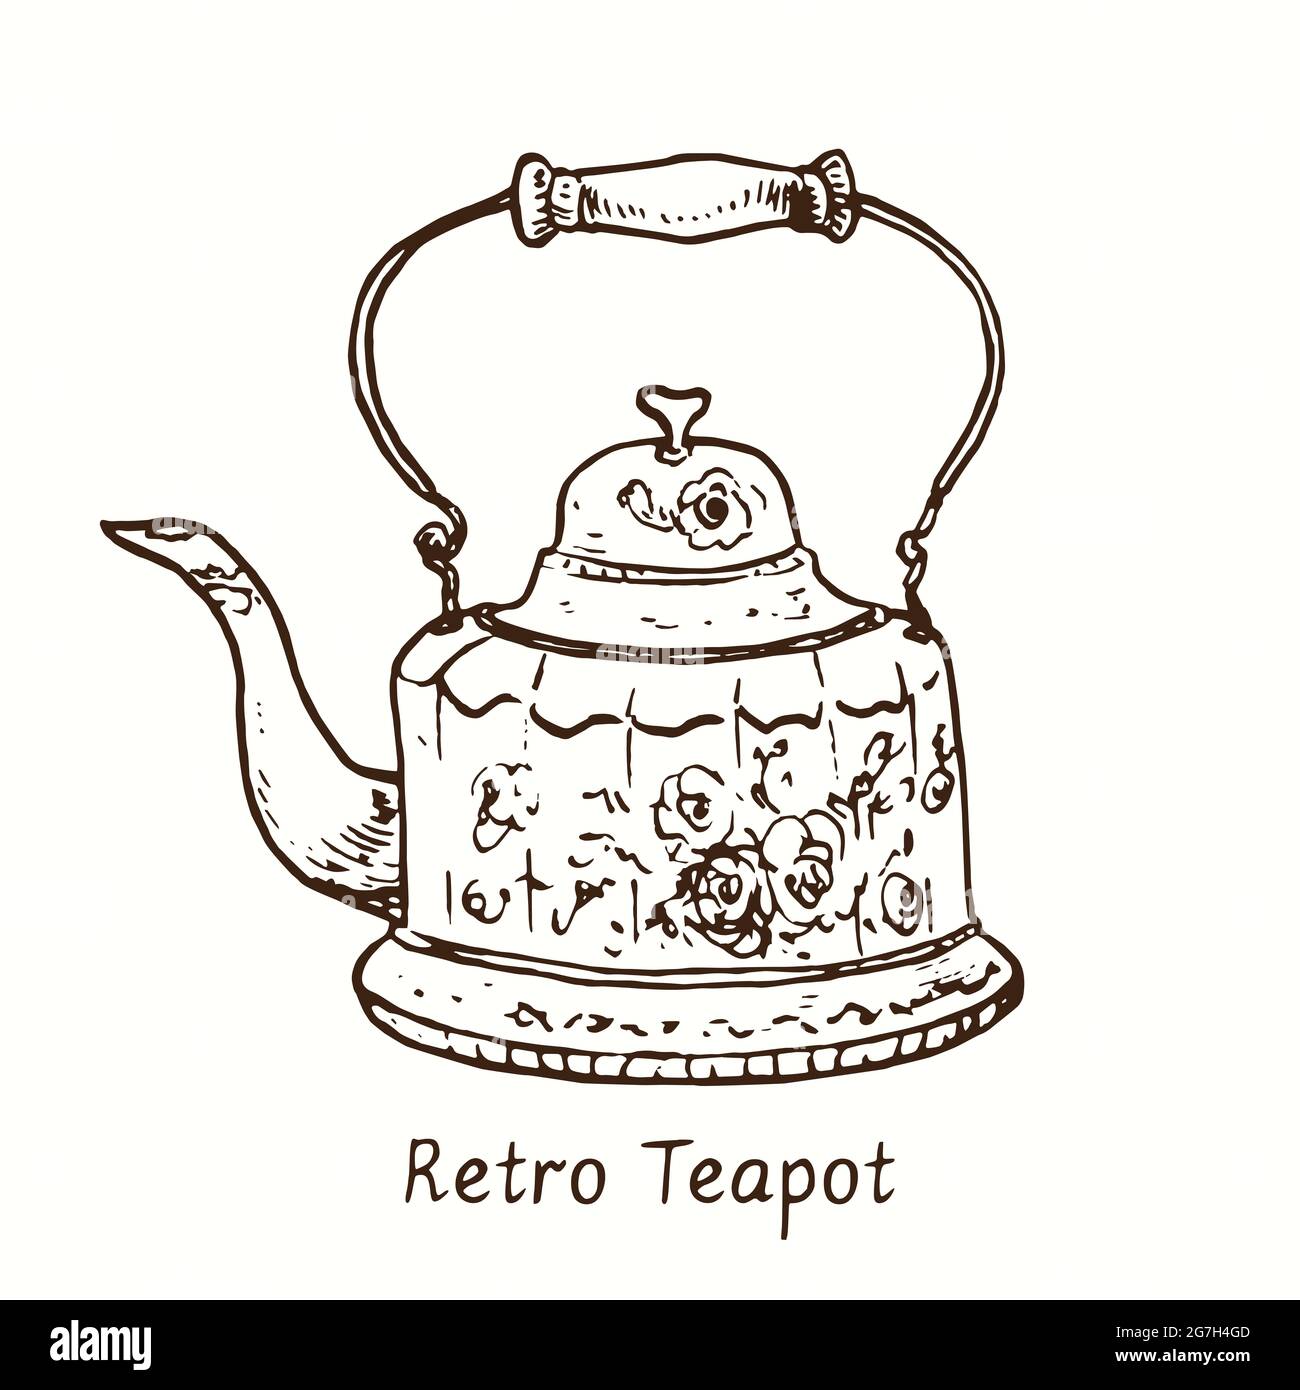 https://c8.alamy.com/comp/2G7H4GD/retro-teapot-with-floral-decor-ink-black-and-white-drawing-outline-illustration-2G7H4GD.jpg